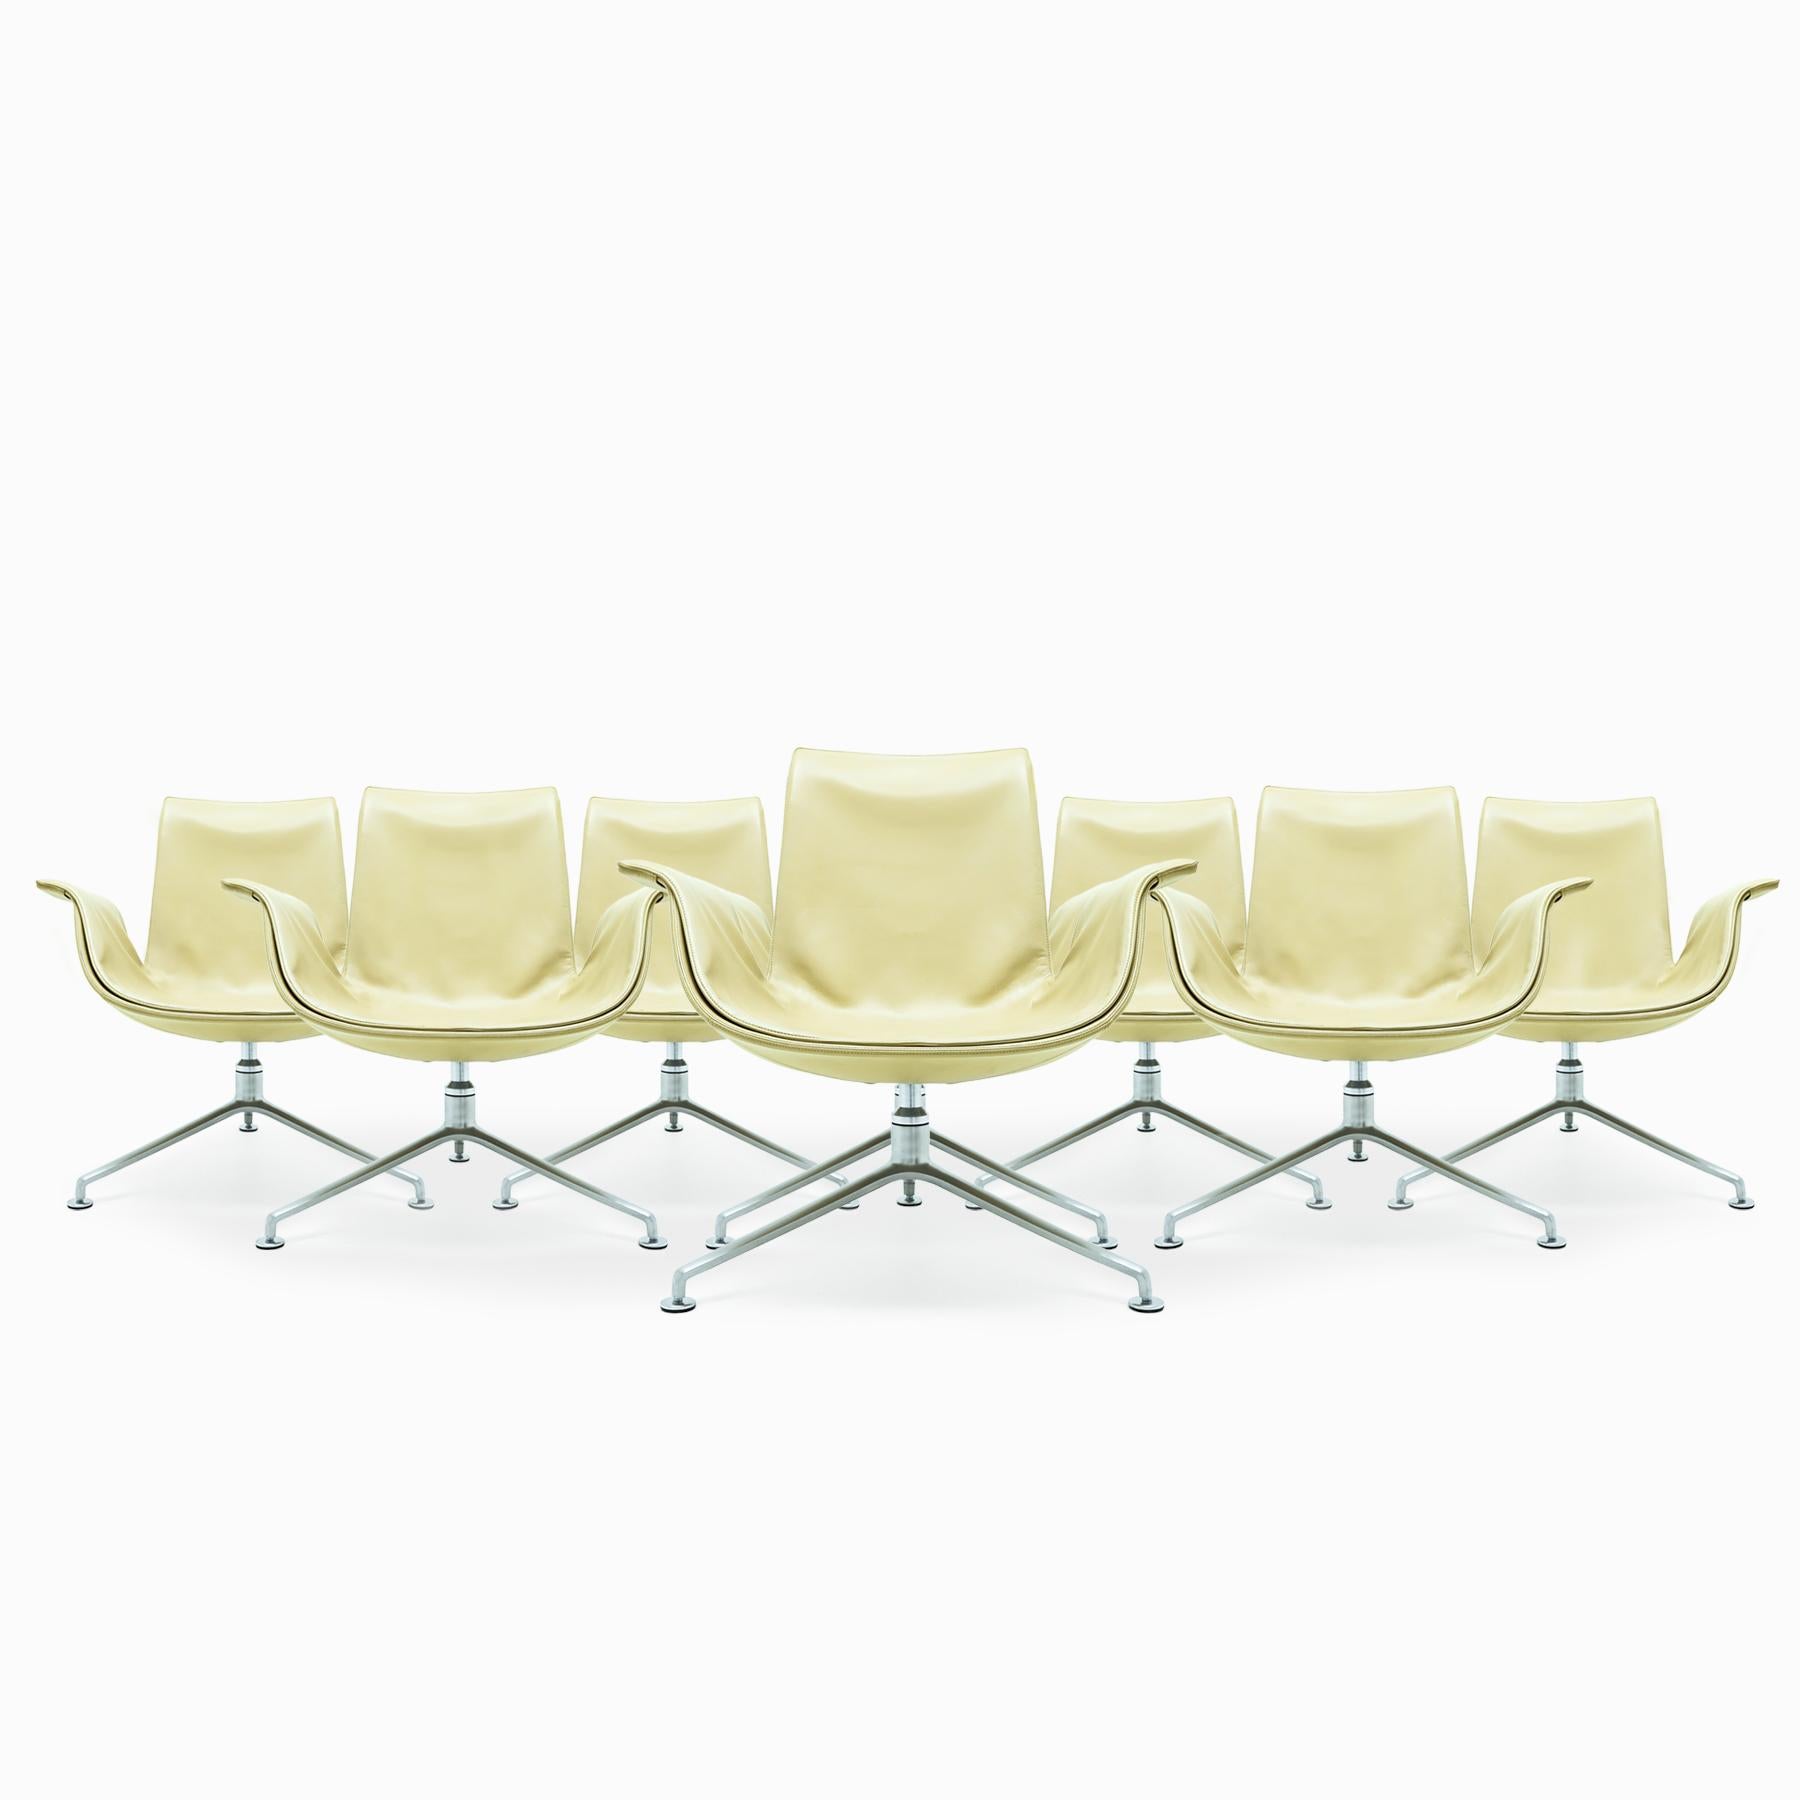 An exceptional set of 8 Danish Mid Century Preben Fabricius and Jørgen Kastlhom FK Lounge Chairs, model FK 6727-3G for Walter Knoll, in a light biscuit coloured leather with satin polished aluminium 3 star base. The price is for one chair. Discounts